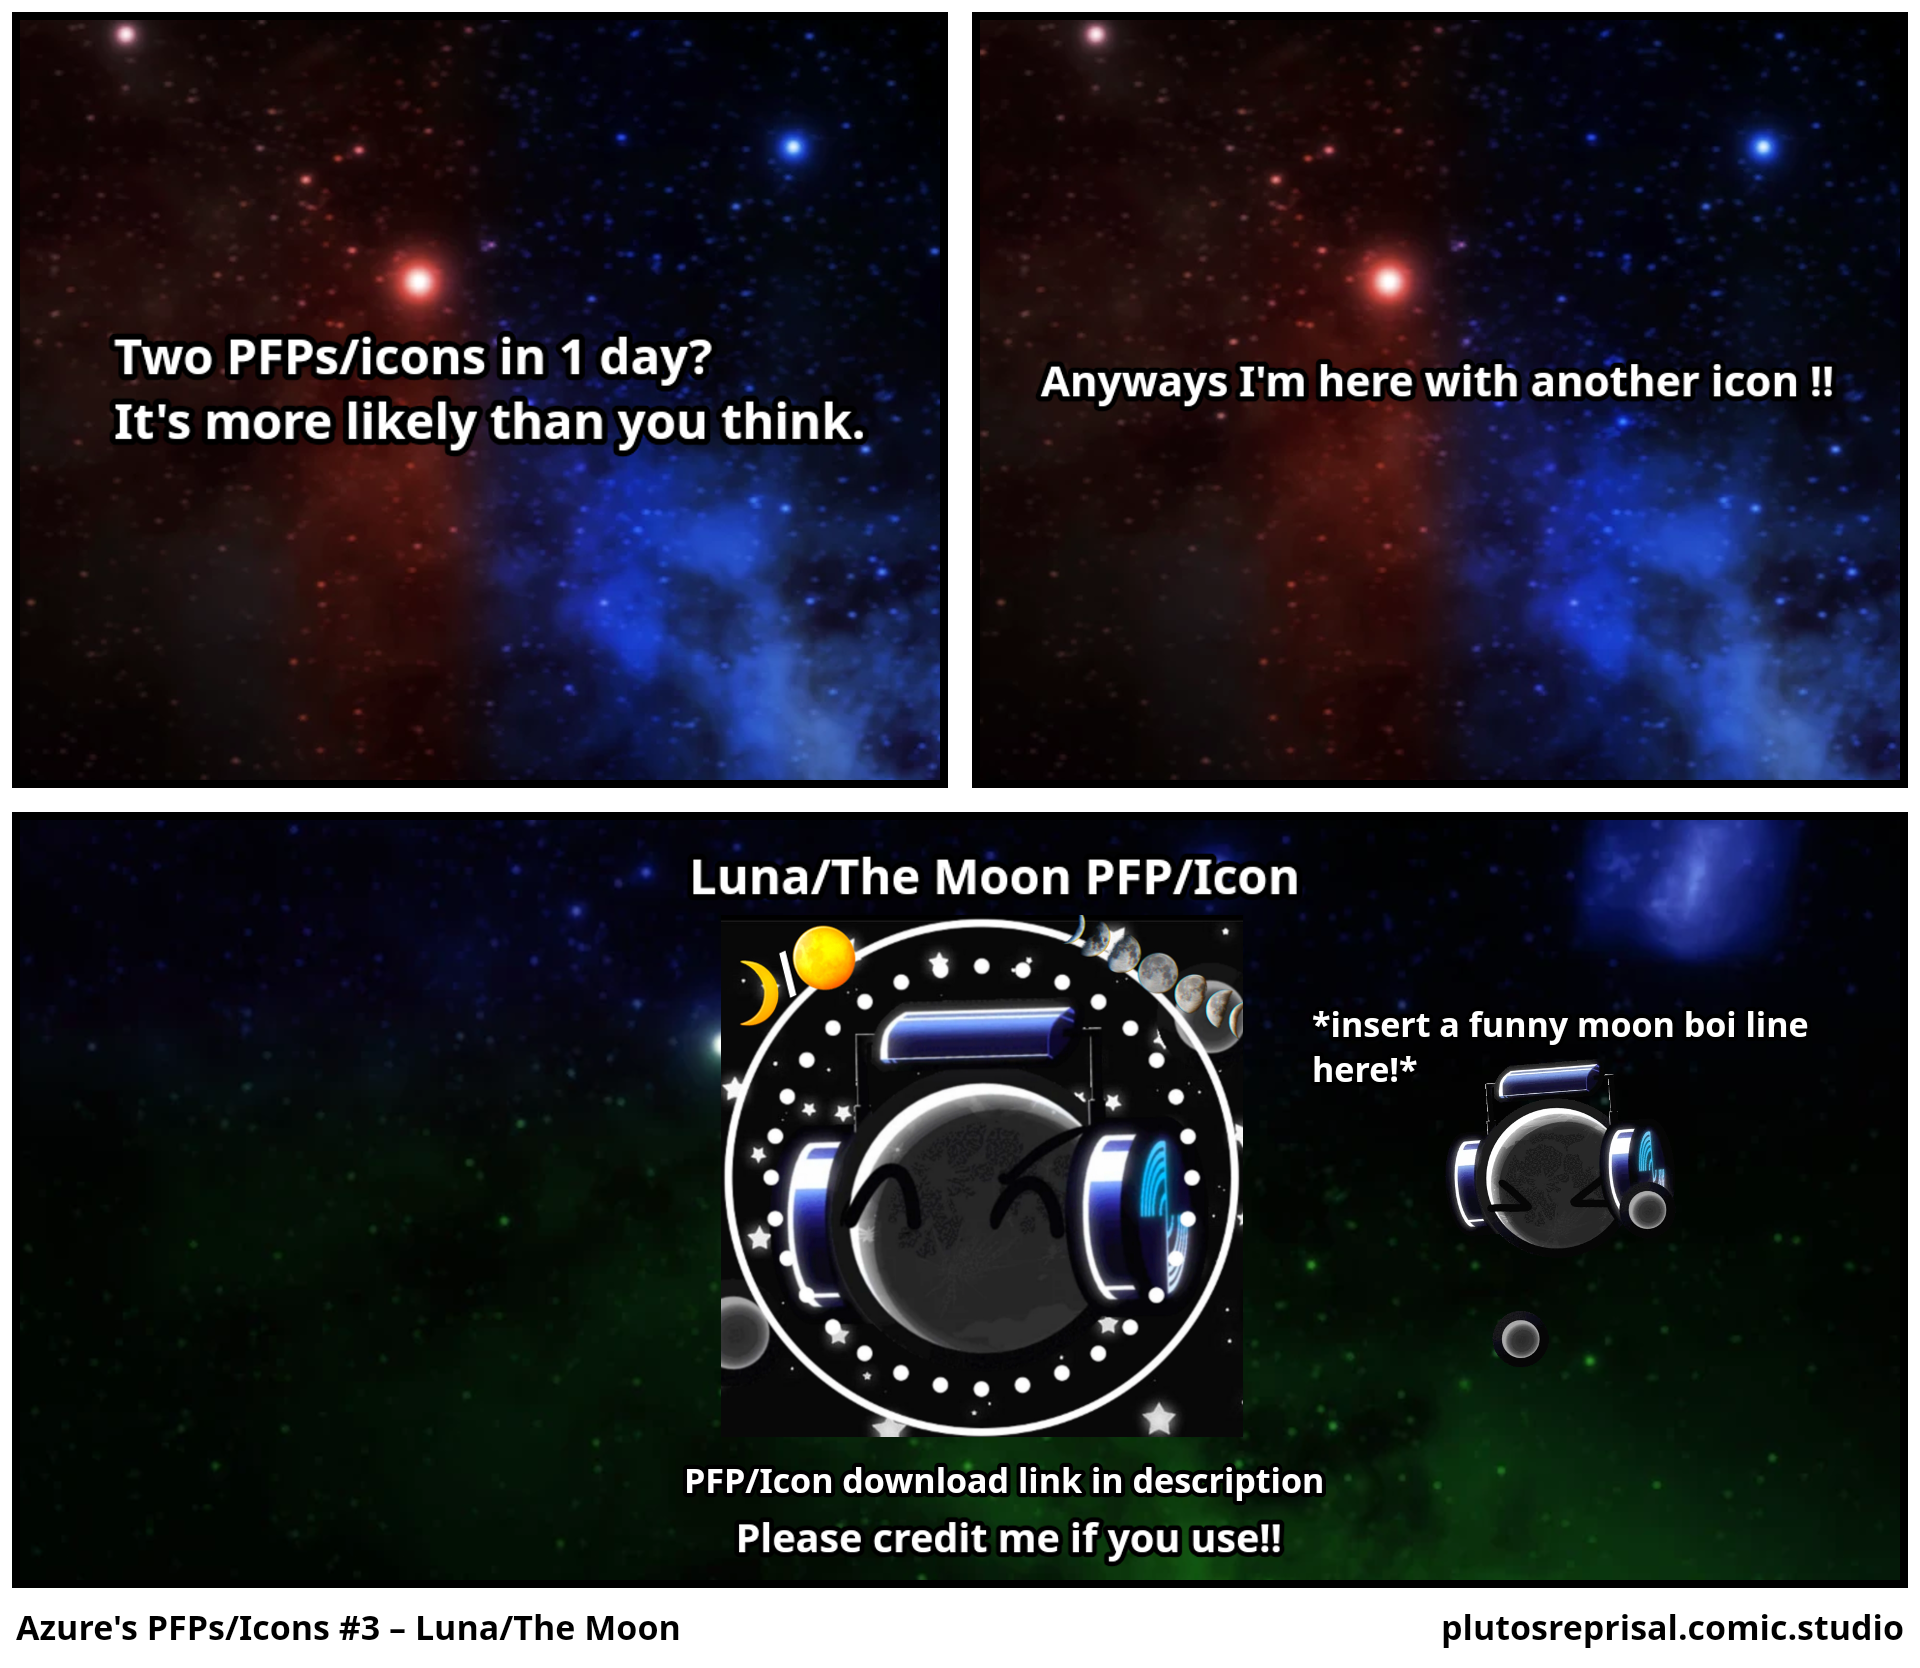 Azure's PFPs/Icons #3 – Luna/The Moon